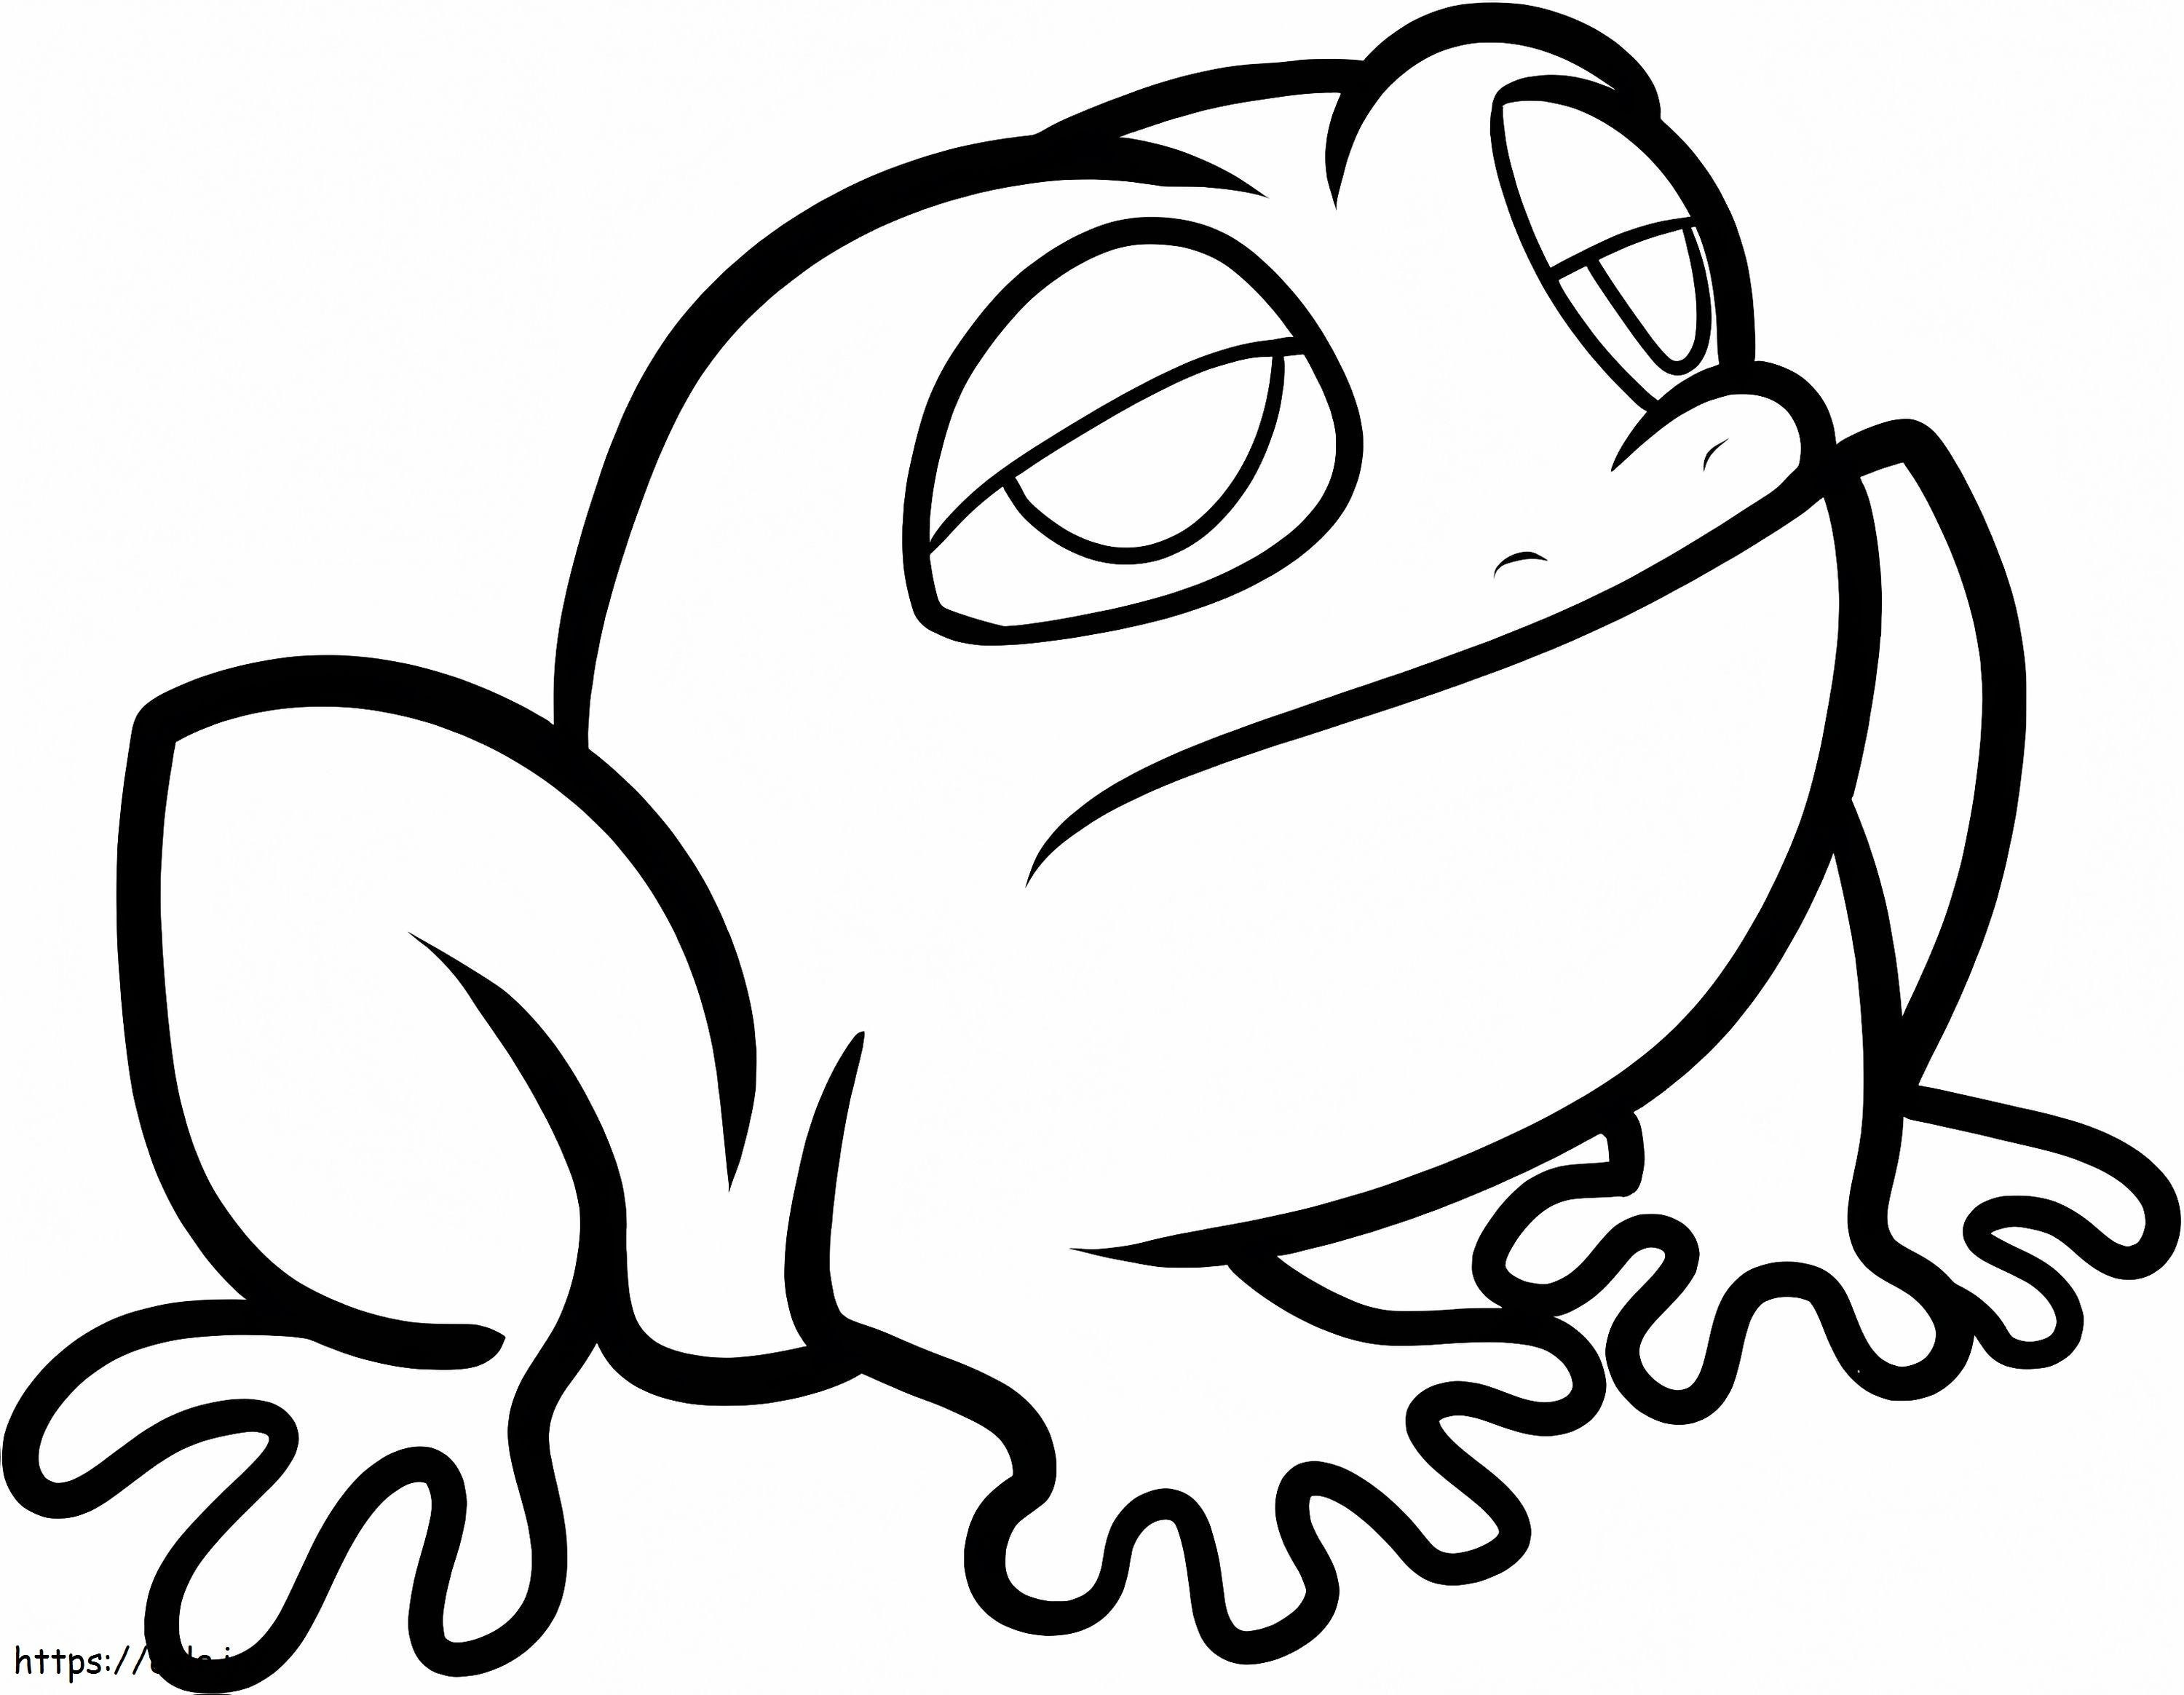 Sad Toad coloring page